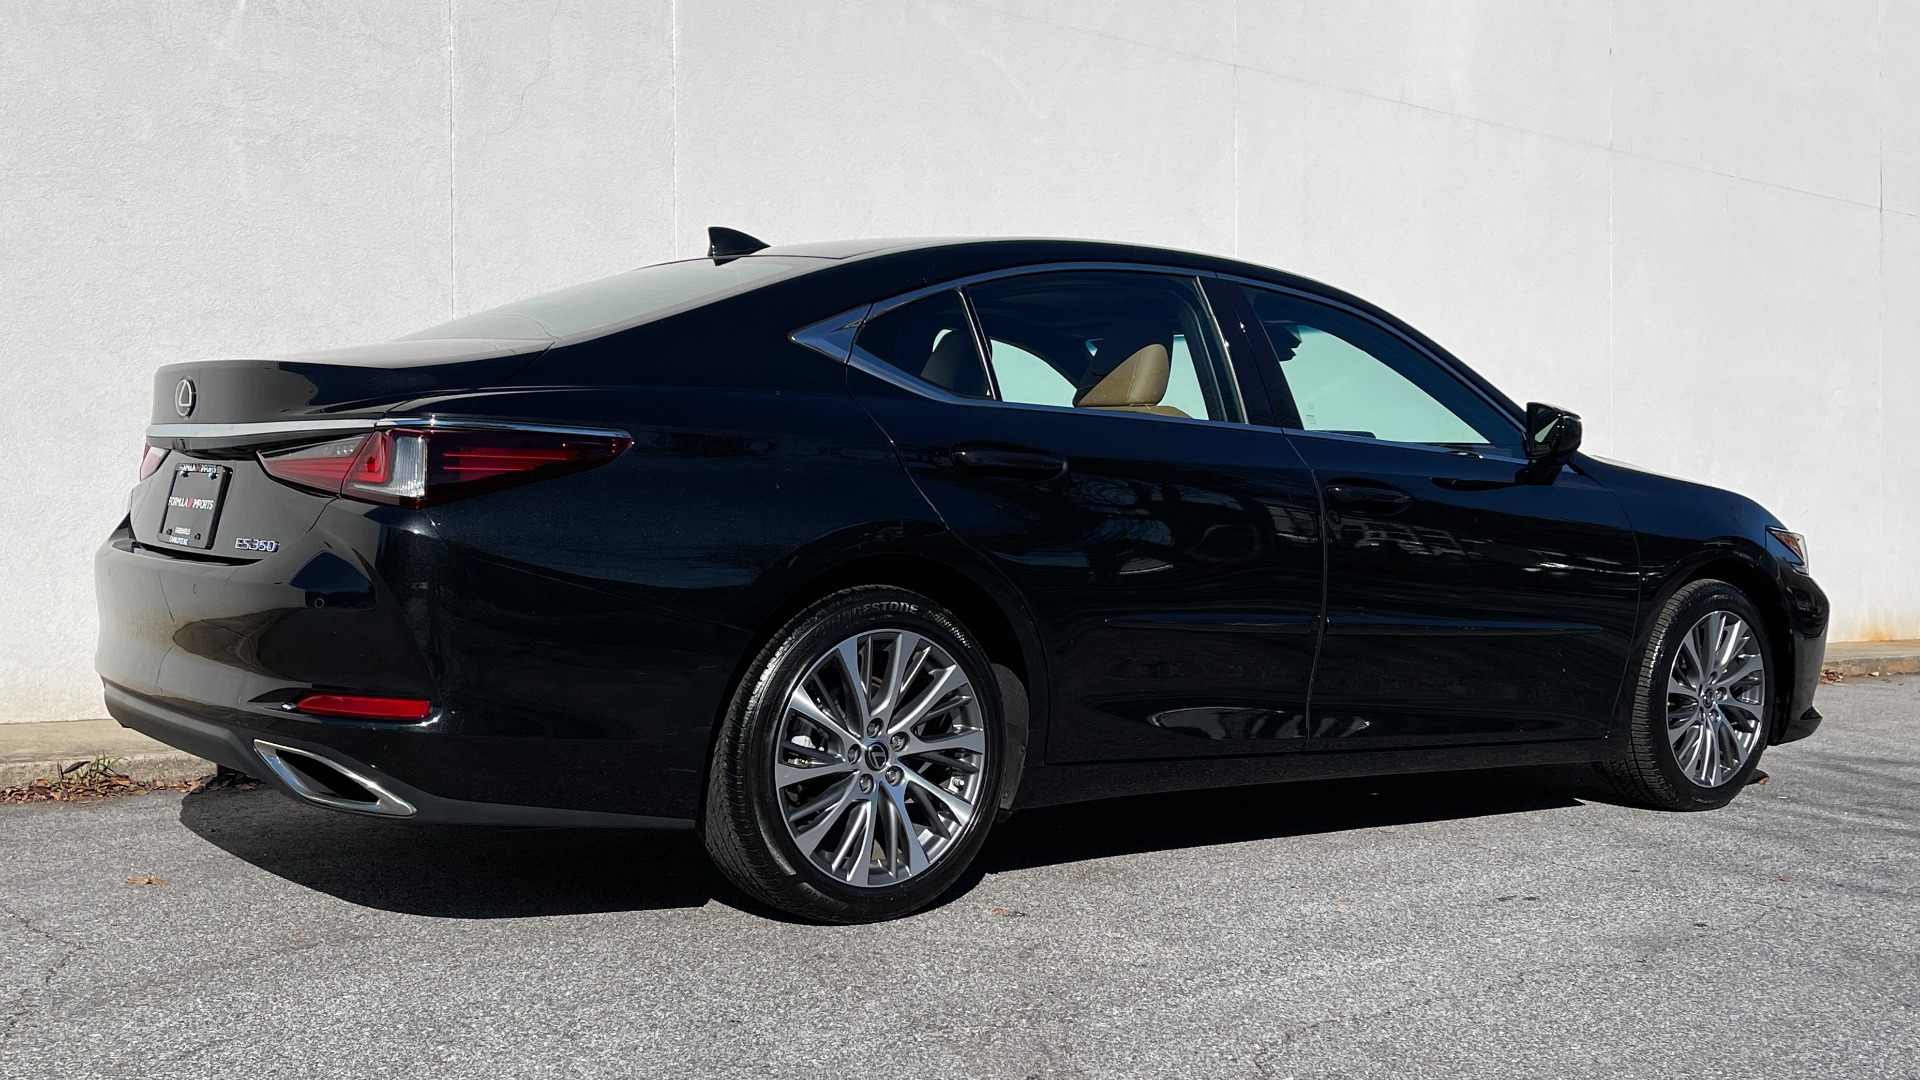 Used 2020 Lexus ES 350 PREMIUM 3.5L SEDAN / BSM / MEMORY / SUNROOF / HTD STS / REARVIEW for sale $44,895 at Formula Imports in Charlotte NC 28227 7